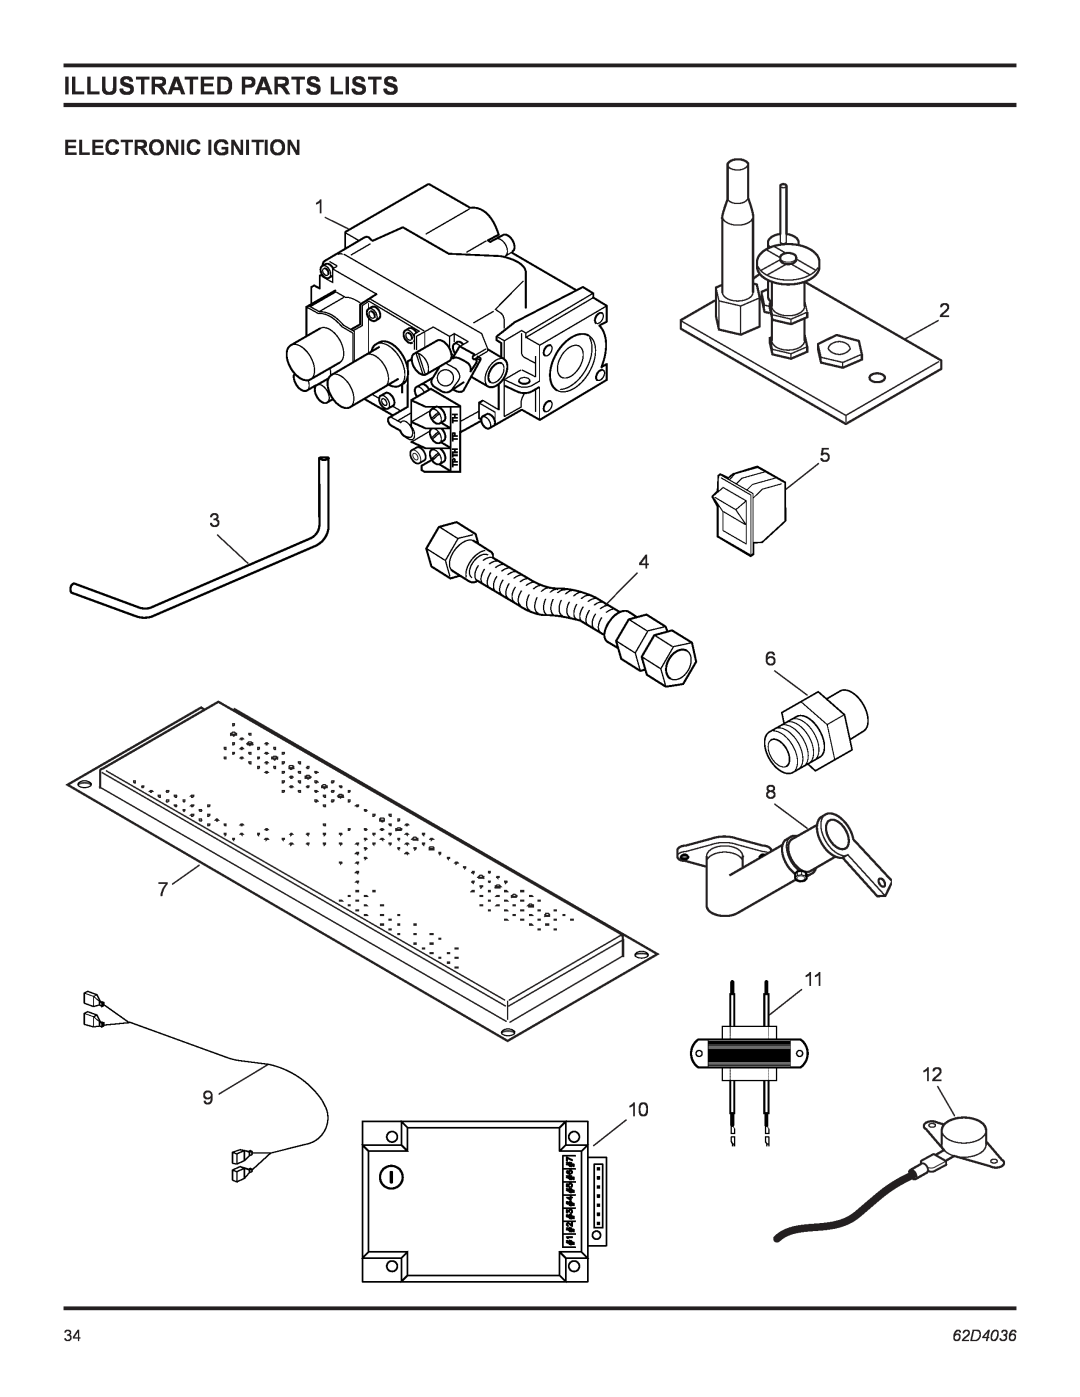 Monessen Hearth SBV500, SBV400, BBV400 manual Illustrated Parts Lists, Electronic Ignition, 1 3, 62D4036 